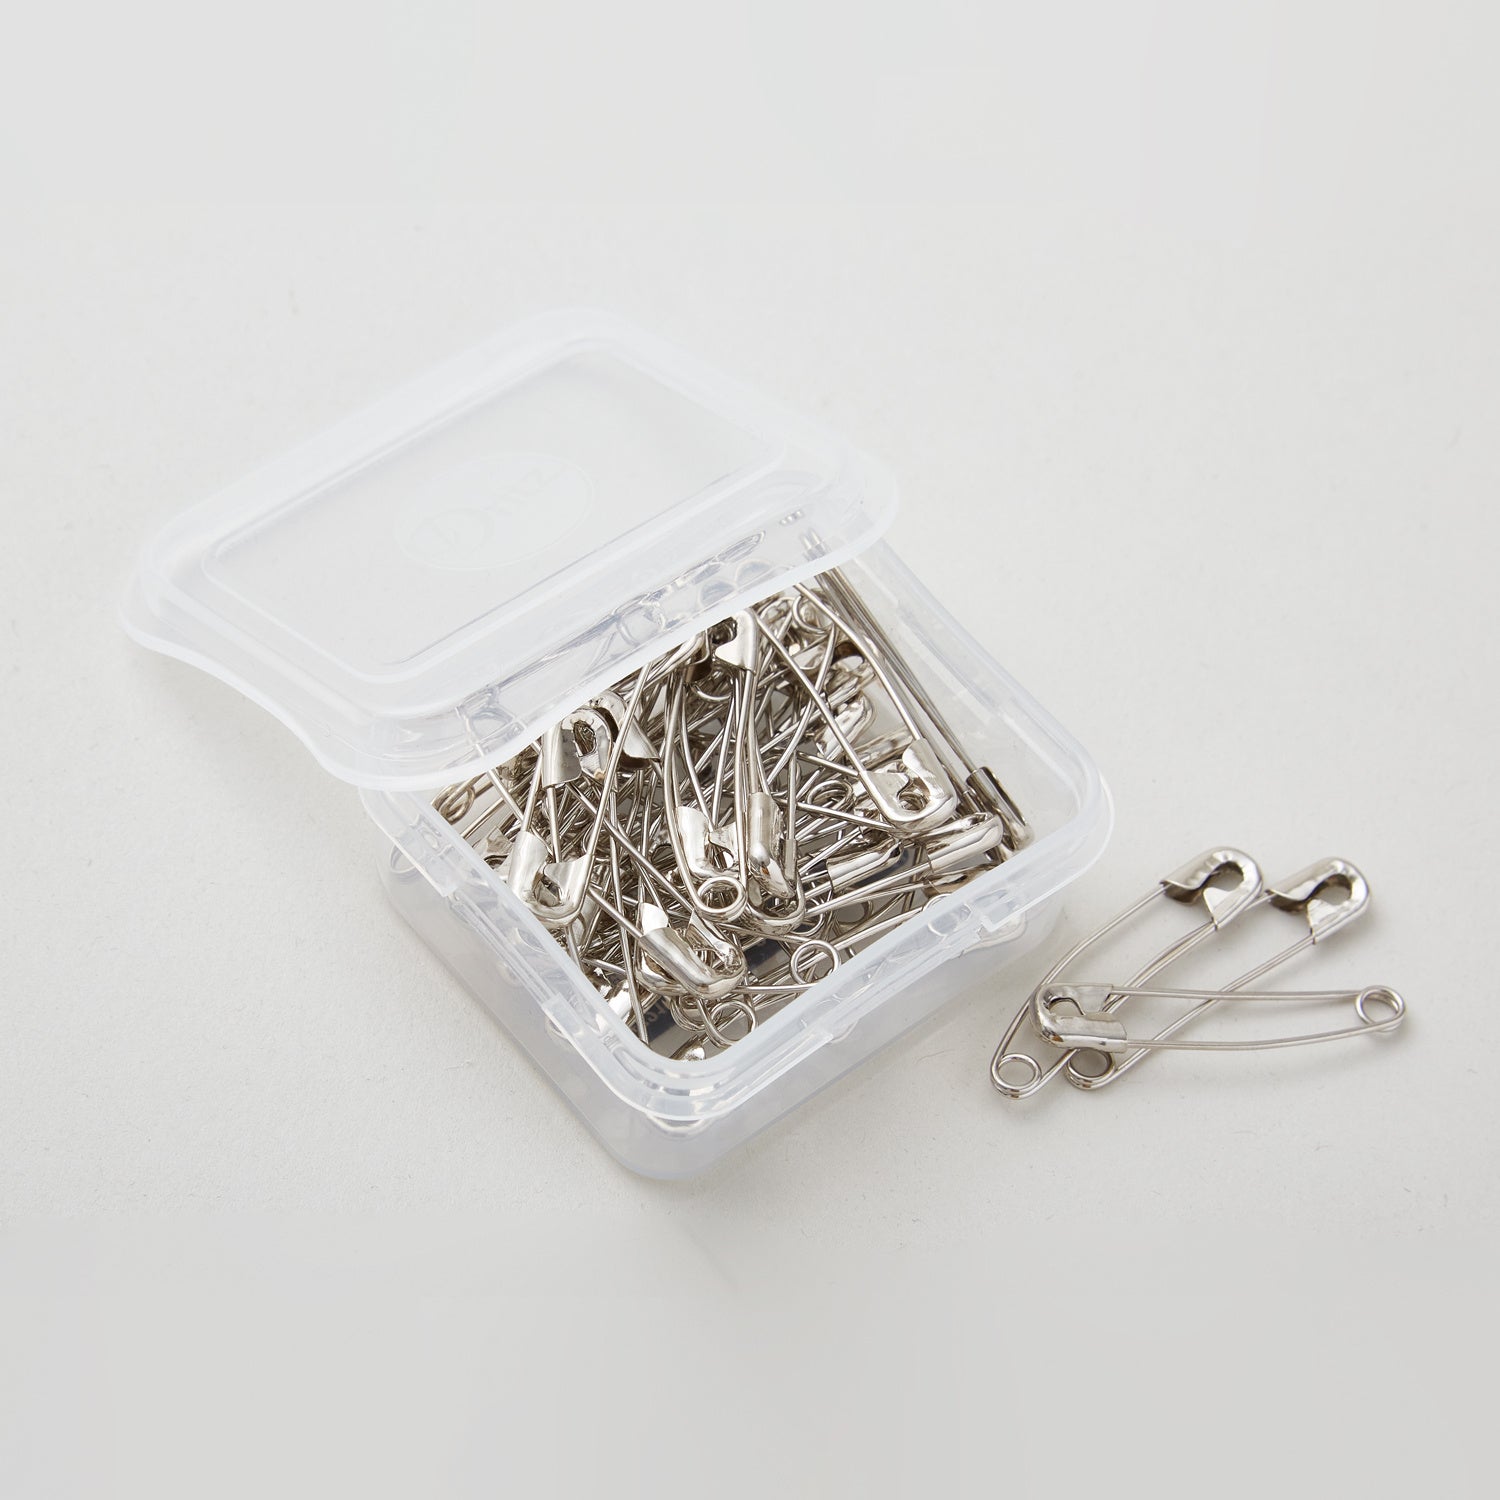 Dritz Assorted Curved Safety Pins & Storage Box, 90 pc